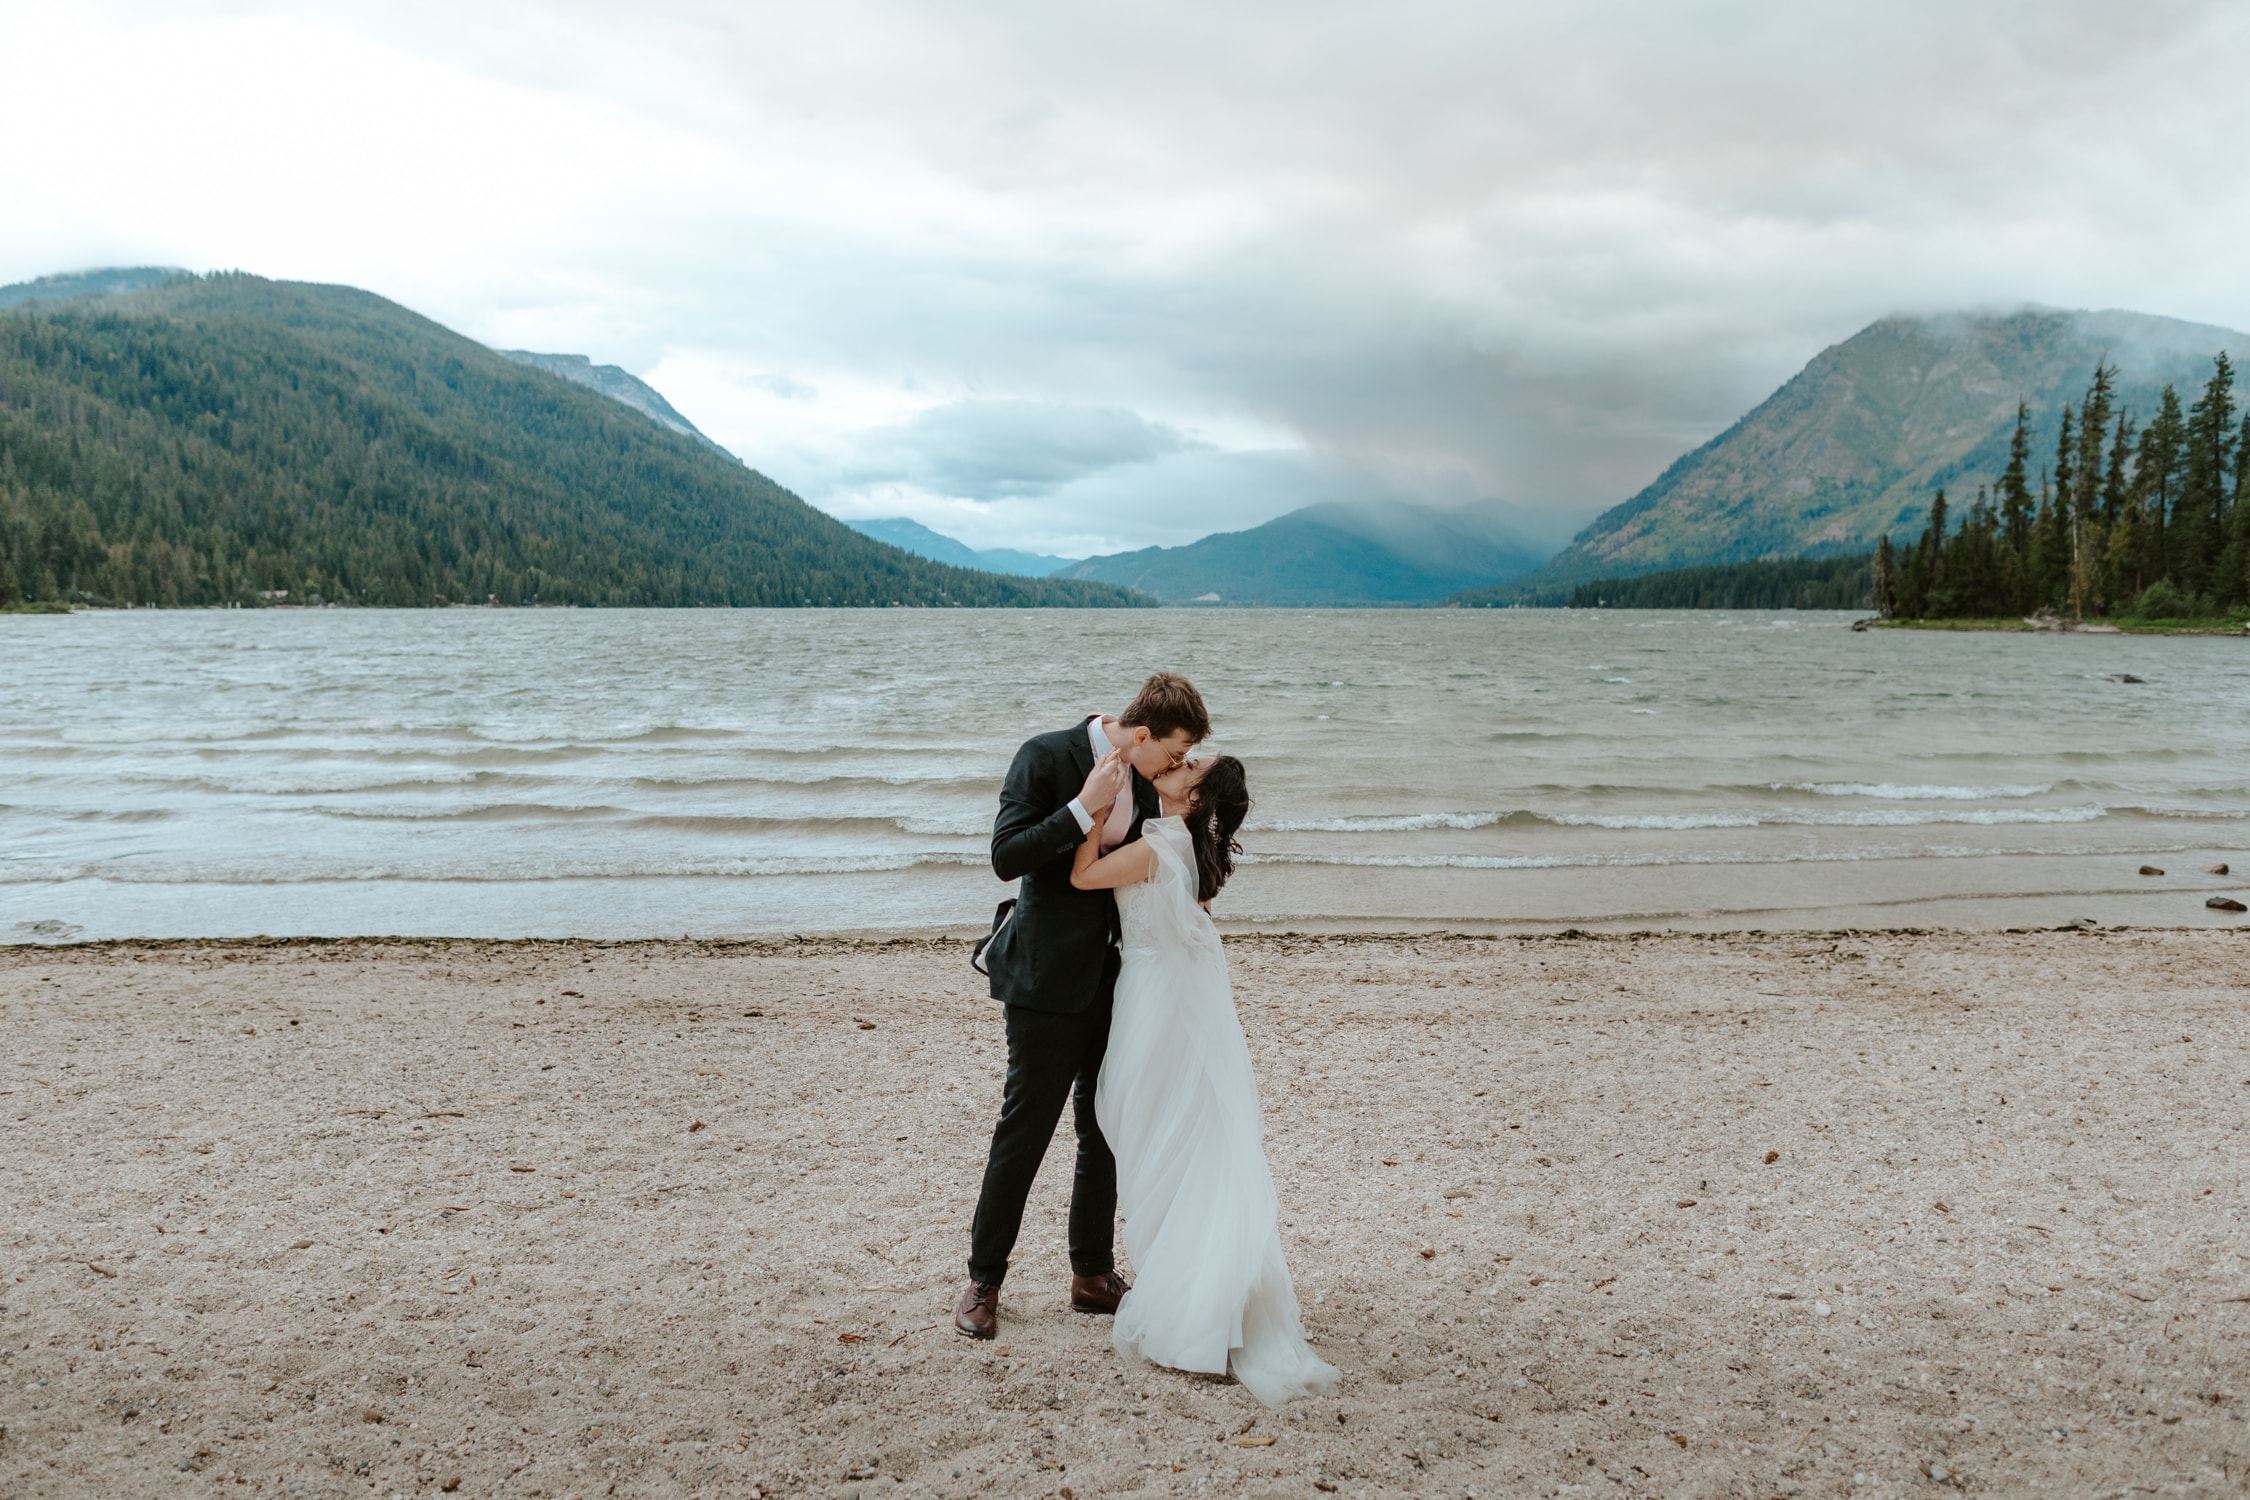 A couple in wedding attire kissing at Lake Wenatchee.